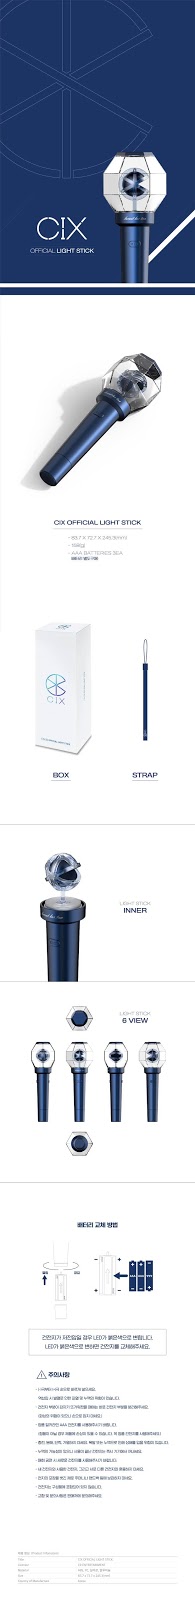 CIX Releases Their Official Lightstick